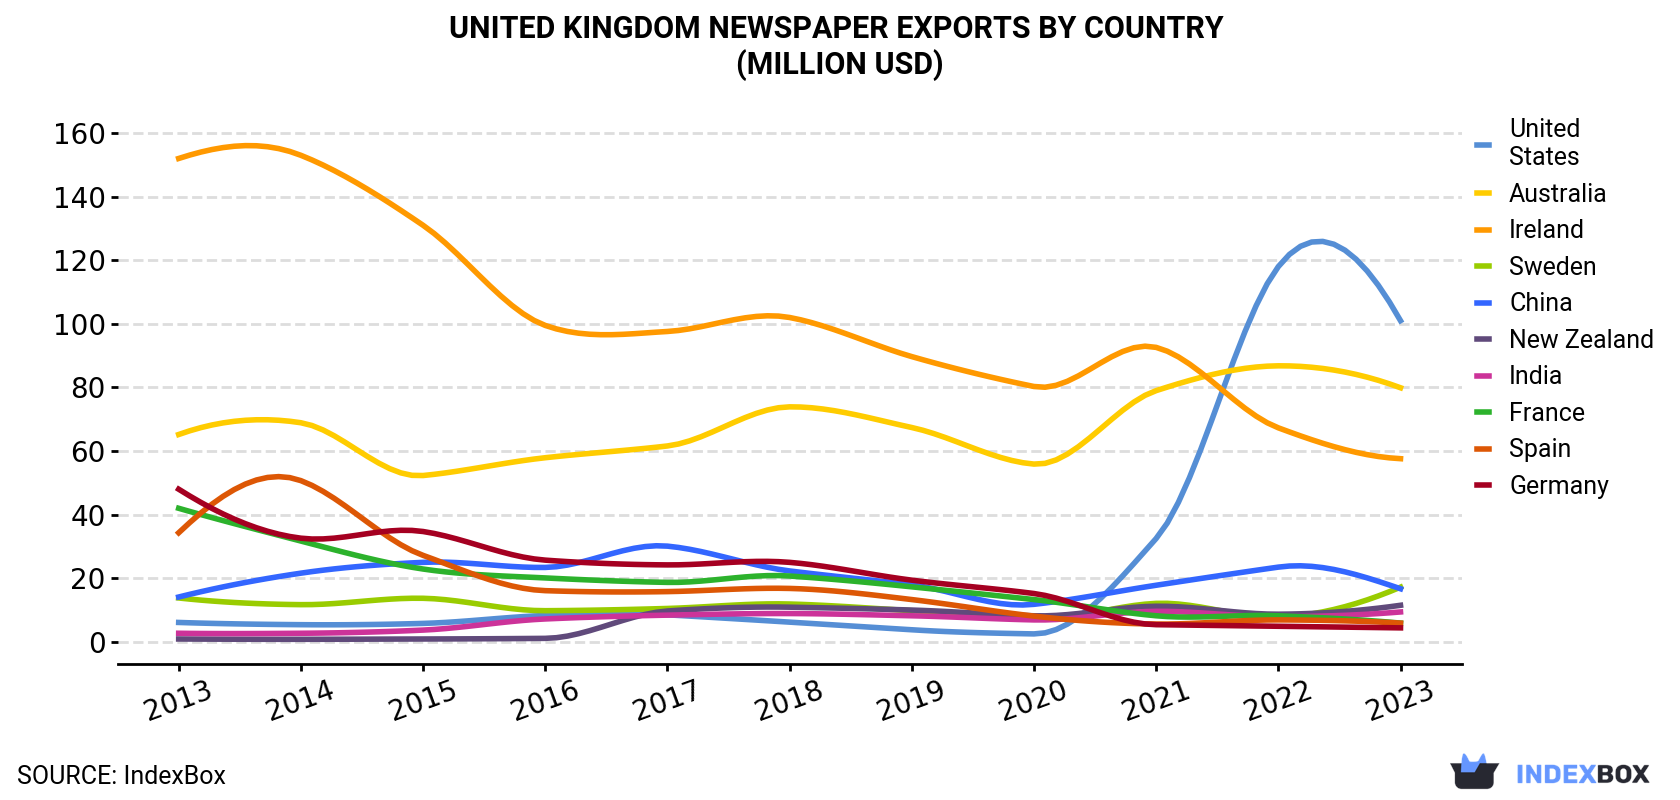 United Kingdom Newspaper Exports By Country (Million USD)